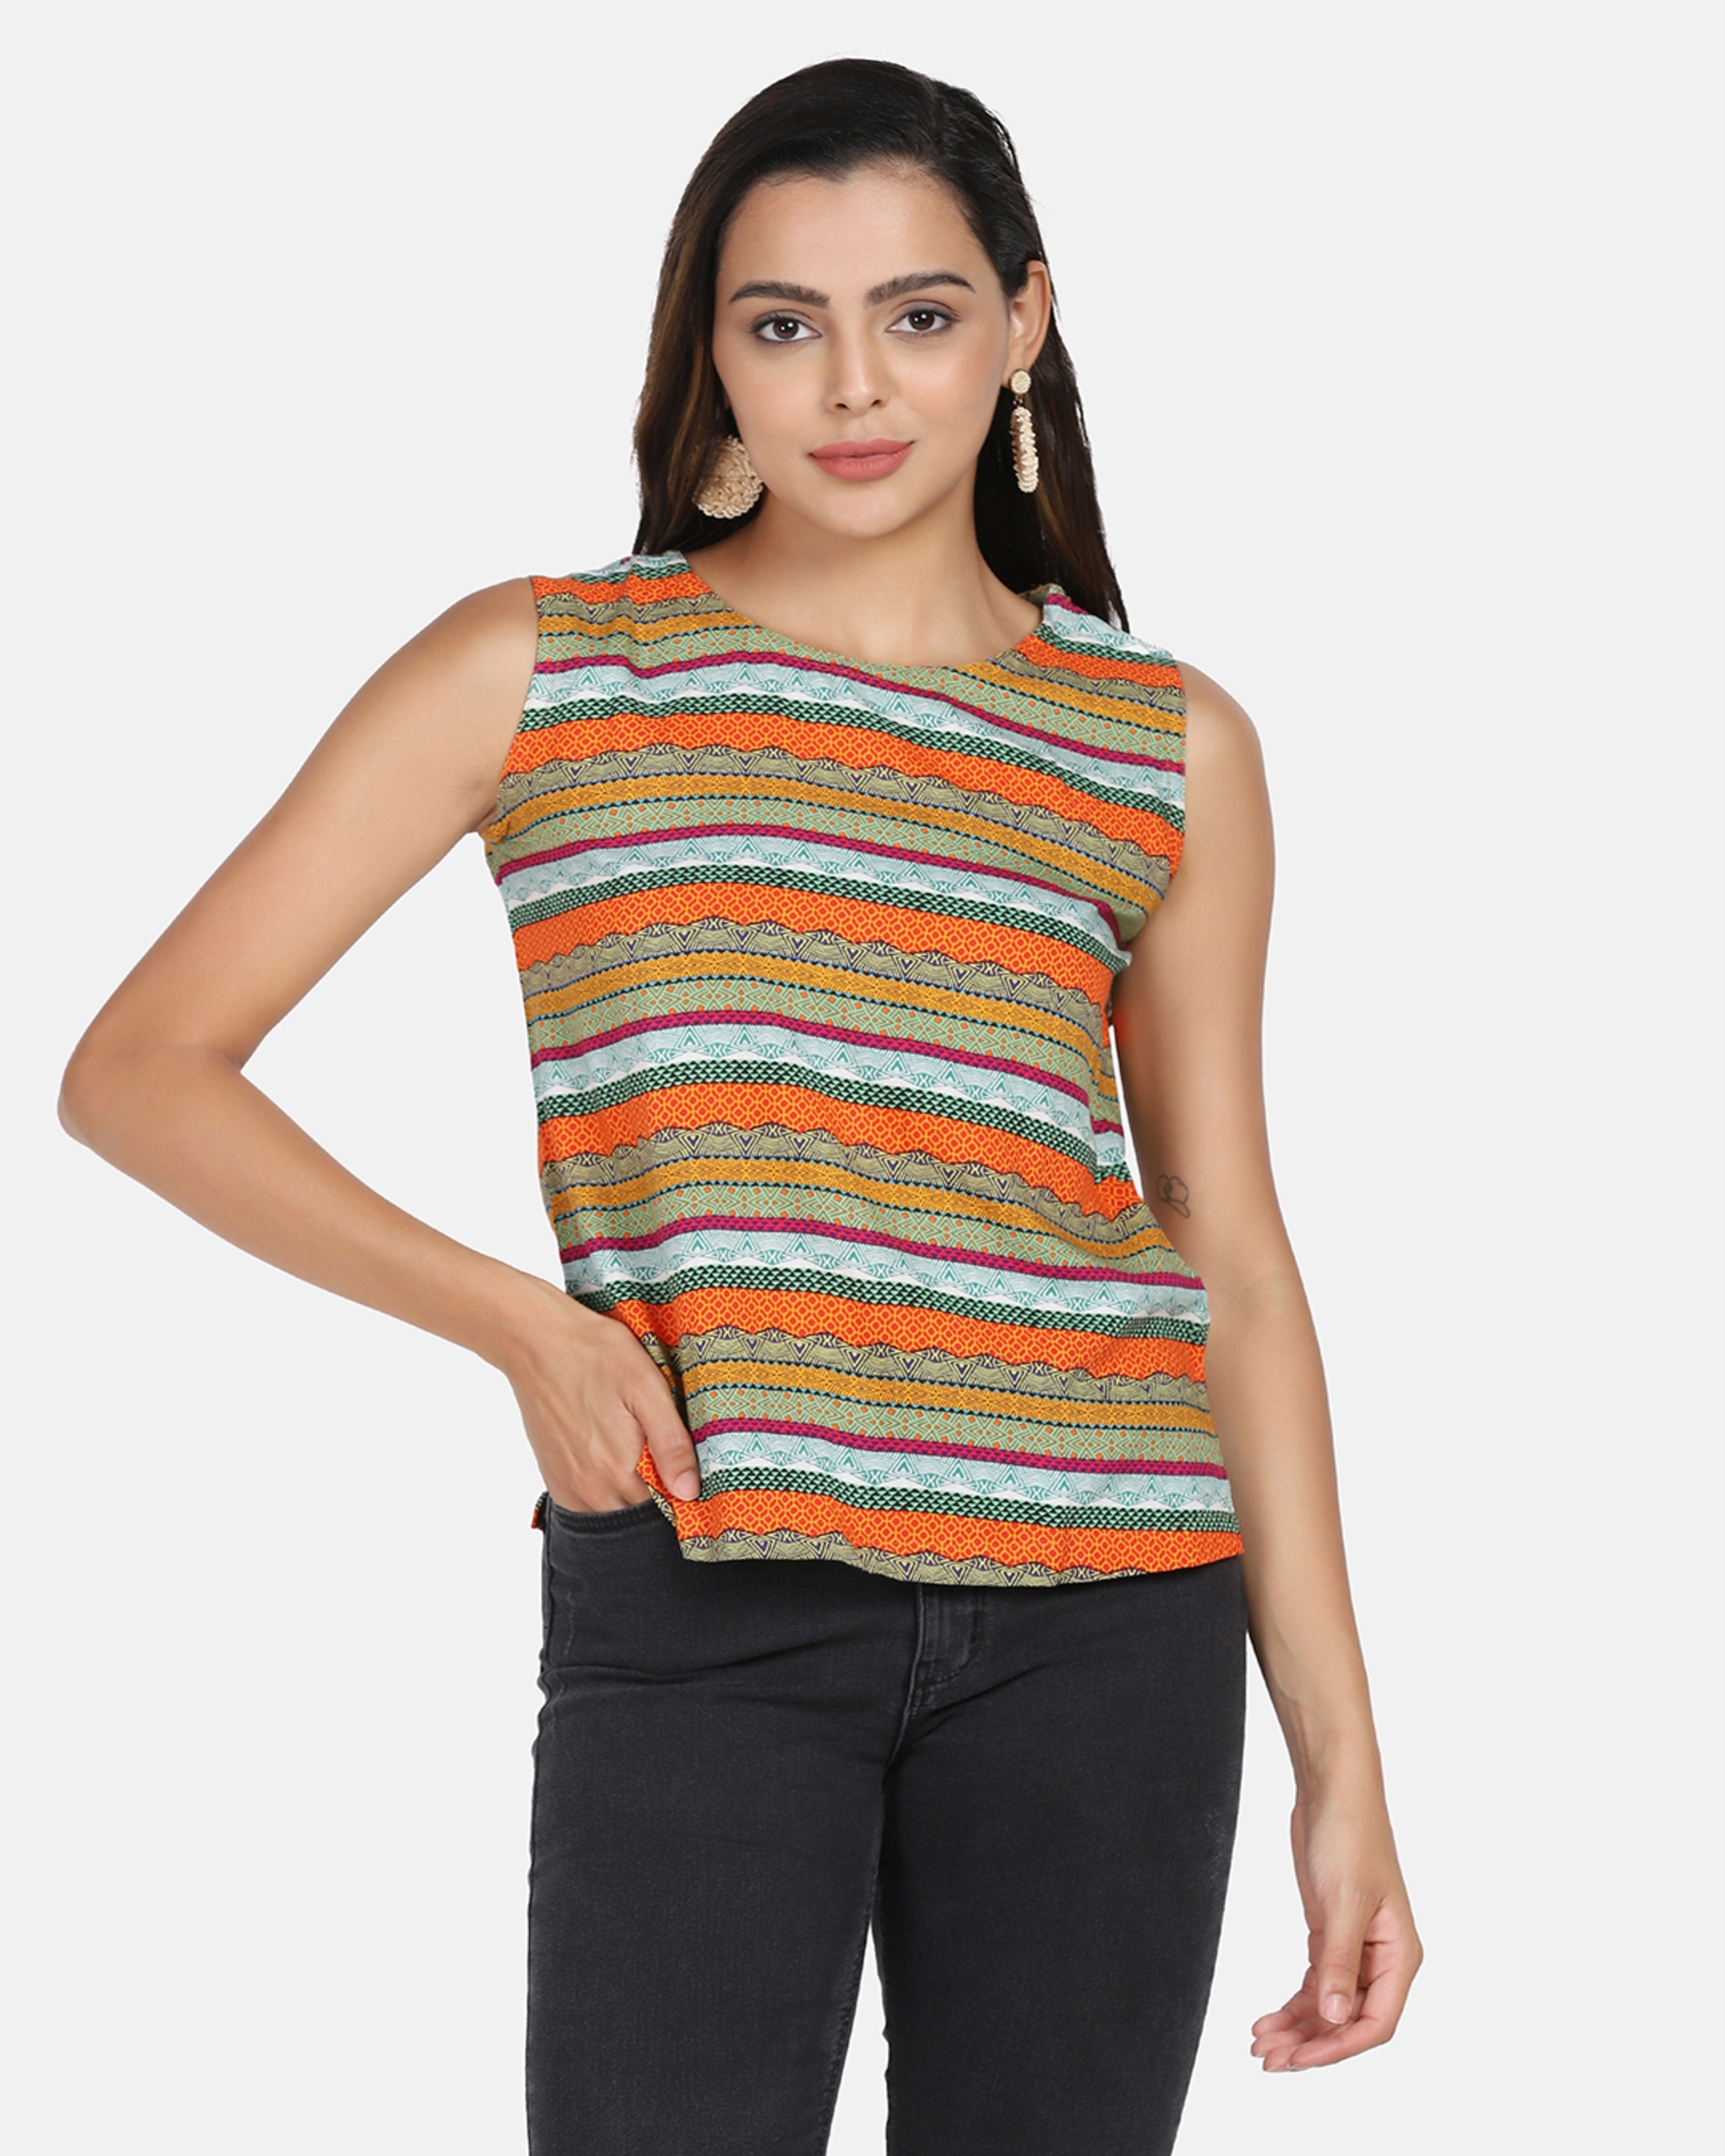 Inands | Rayon Printed Vertical Striped Top undefined